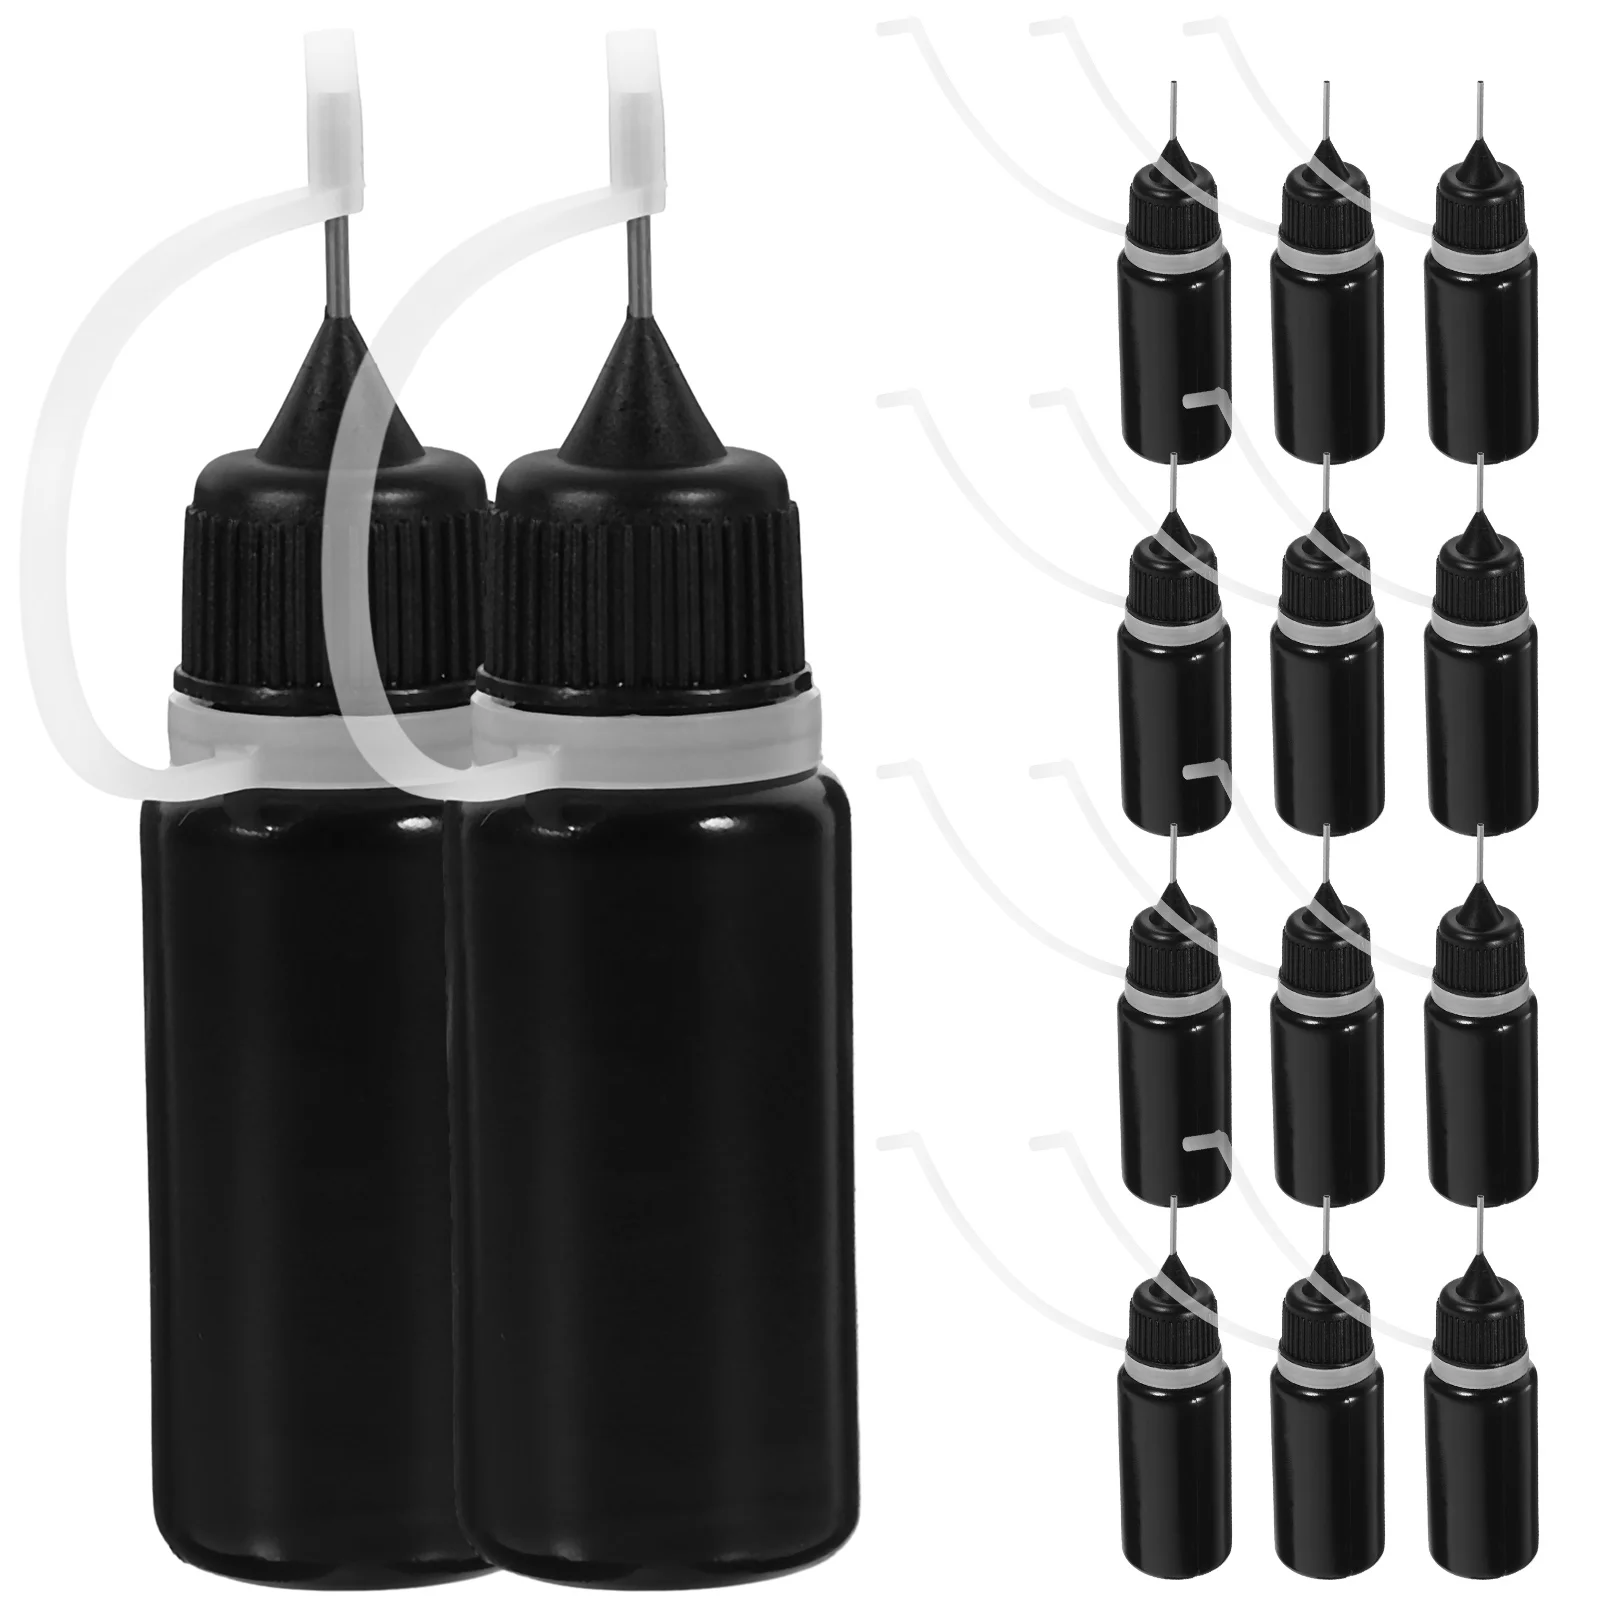 20 Pcs Bottled Squeeze Bottles Glue with Fine Tip for Liquids Needle Small Stainless Steel Precision Applicator Dispenser 20 pcs bottled card making supplies glue bottles precision toiletry stainless steel applicator needle tip squeeze empty